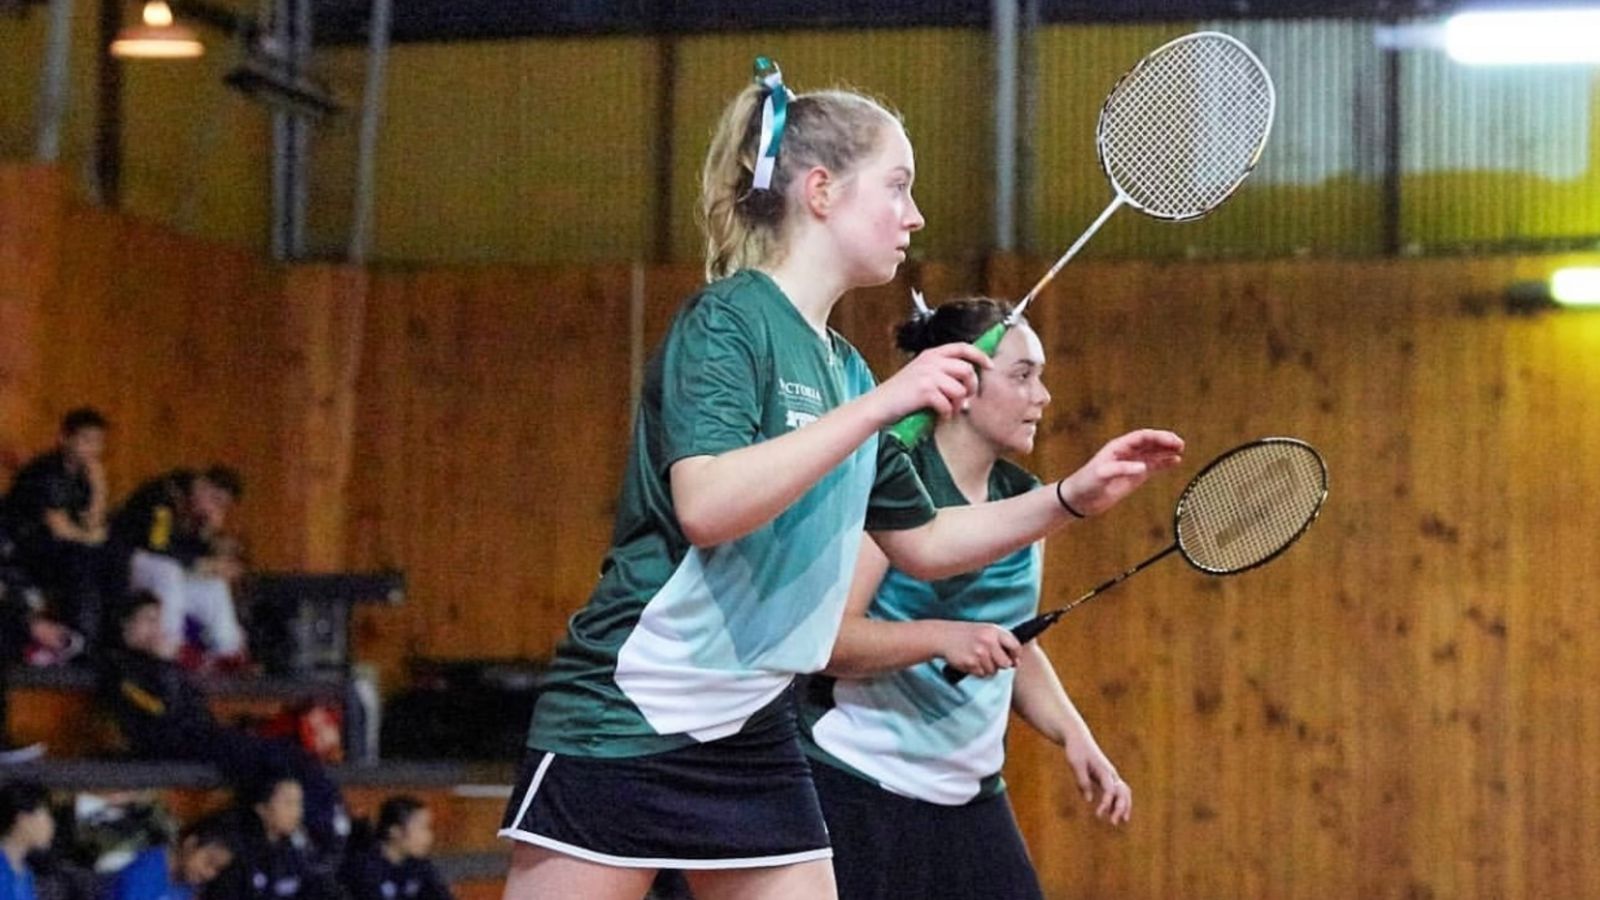 Two badminton players in game with rackets up.